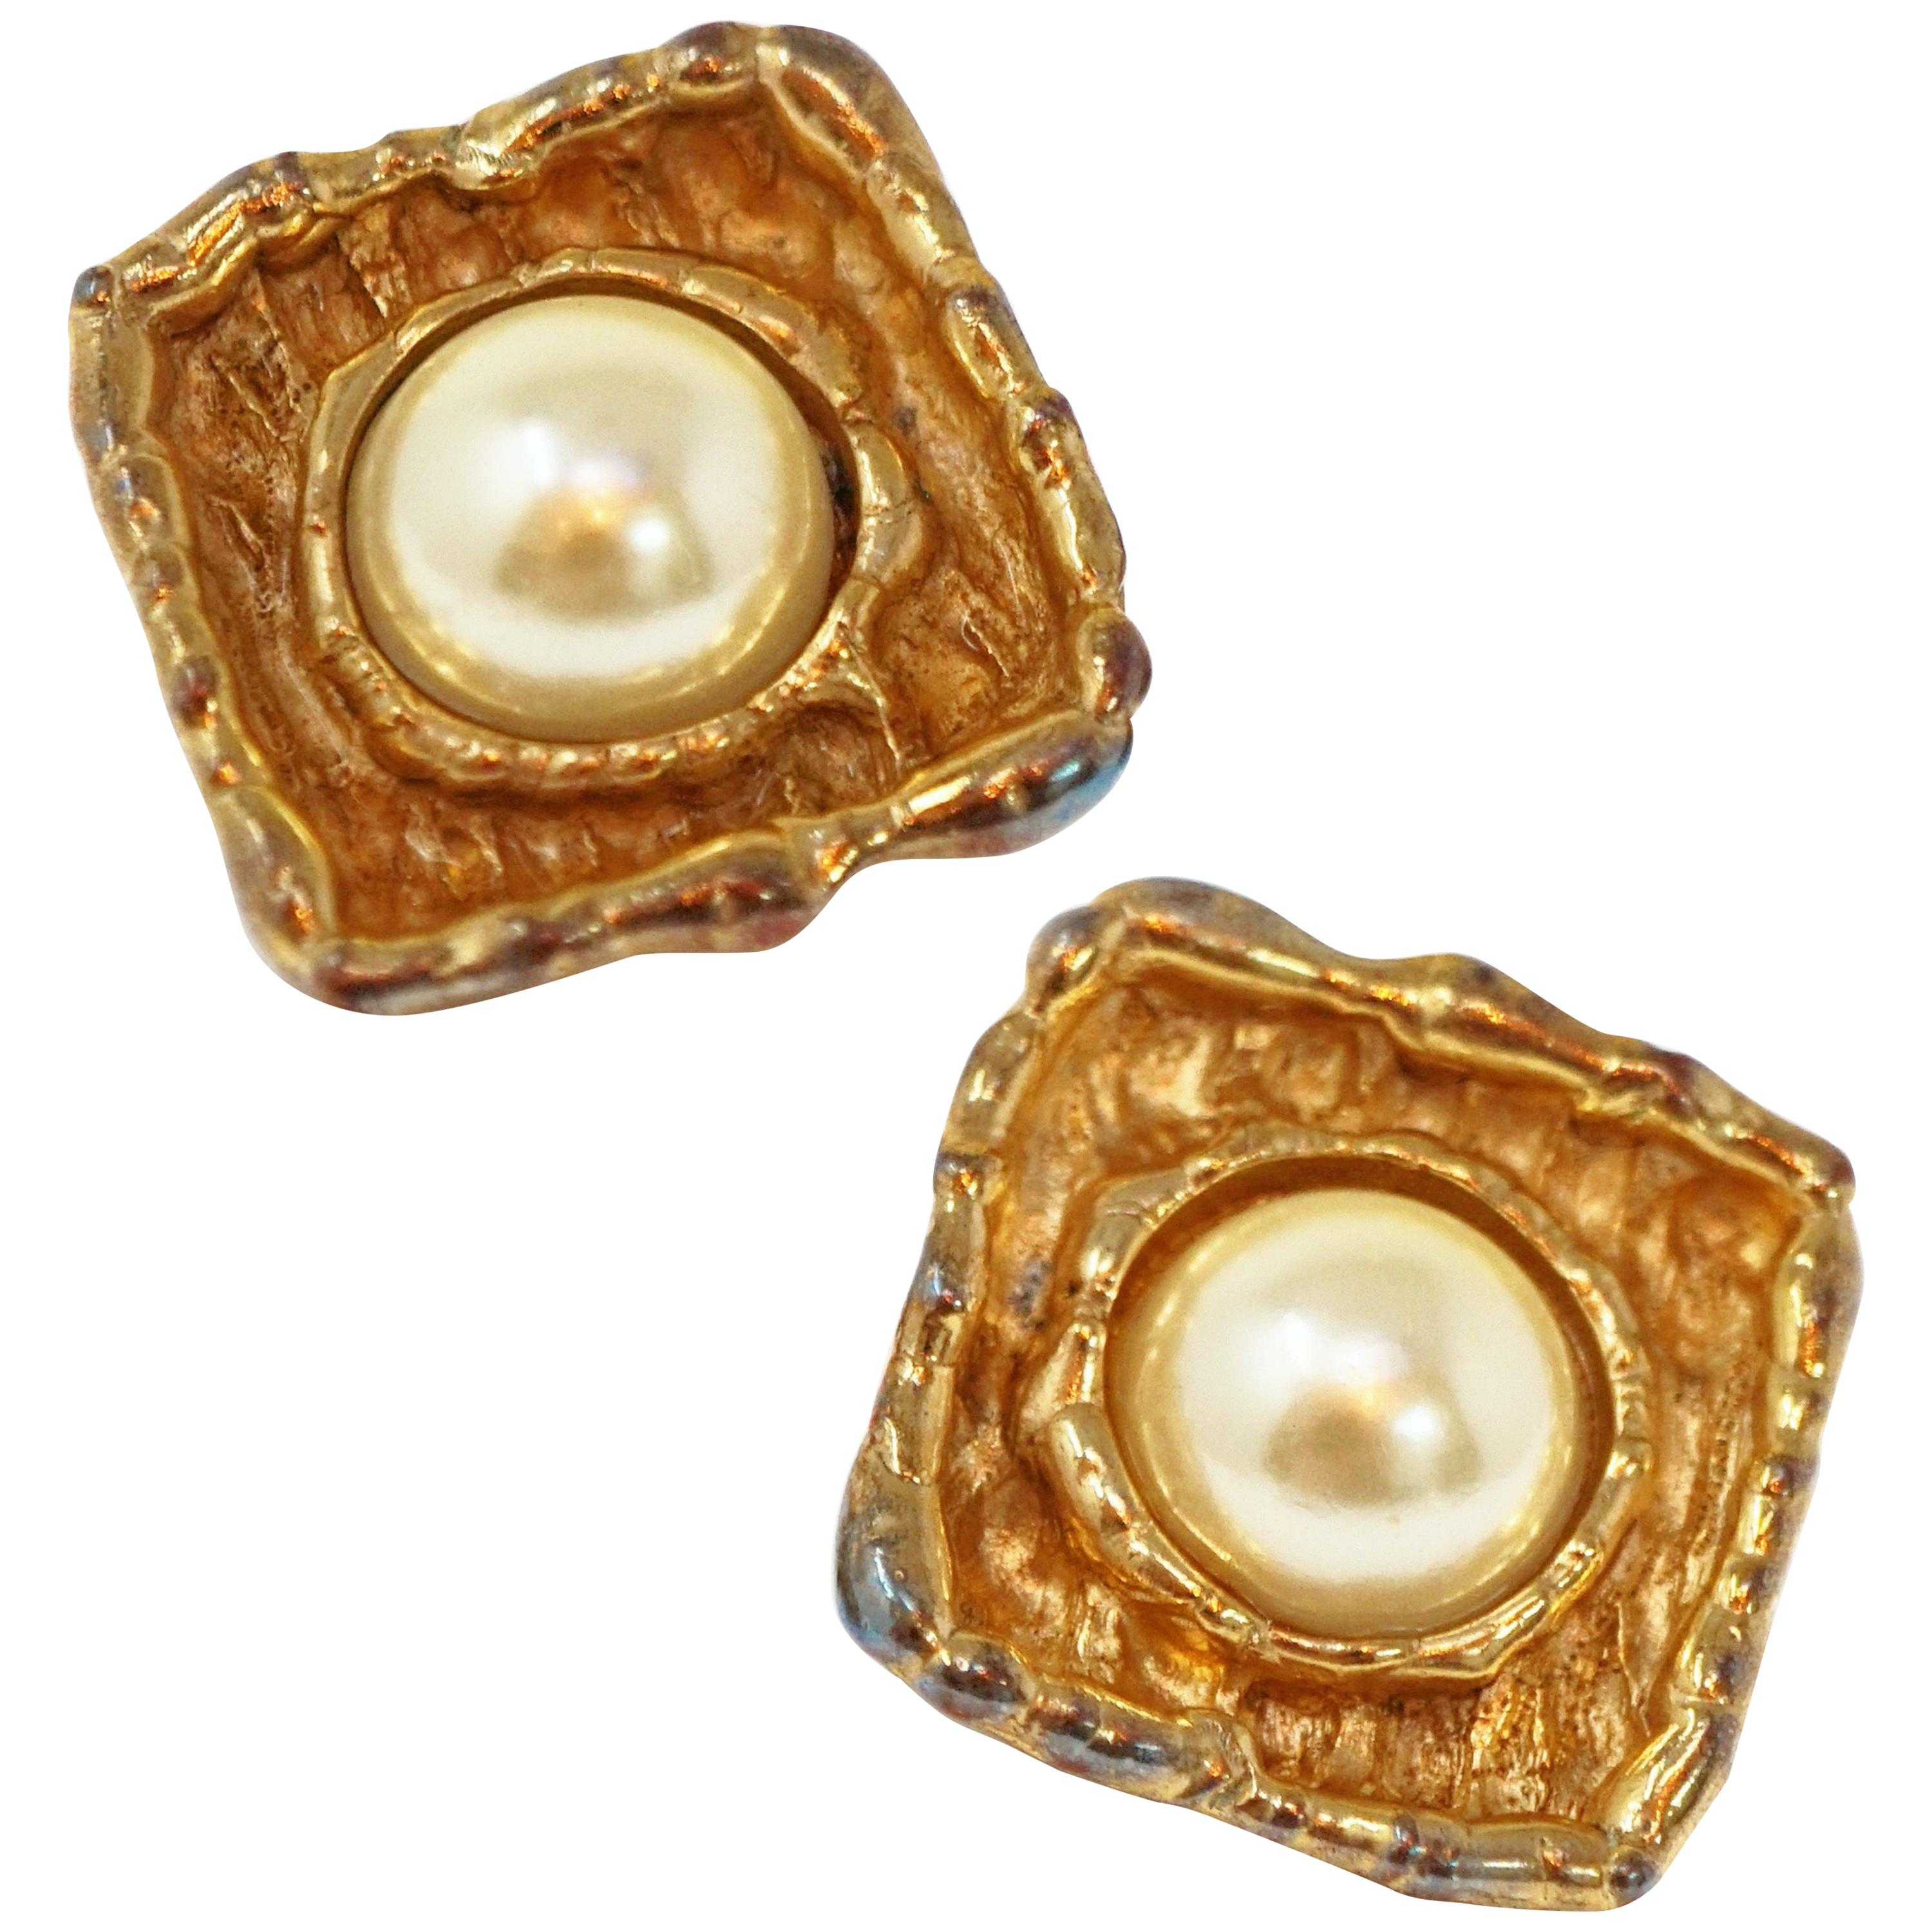 Vintage Gilt & Faux Mabe Pearl Statement Earrings, In The Style of Chanel